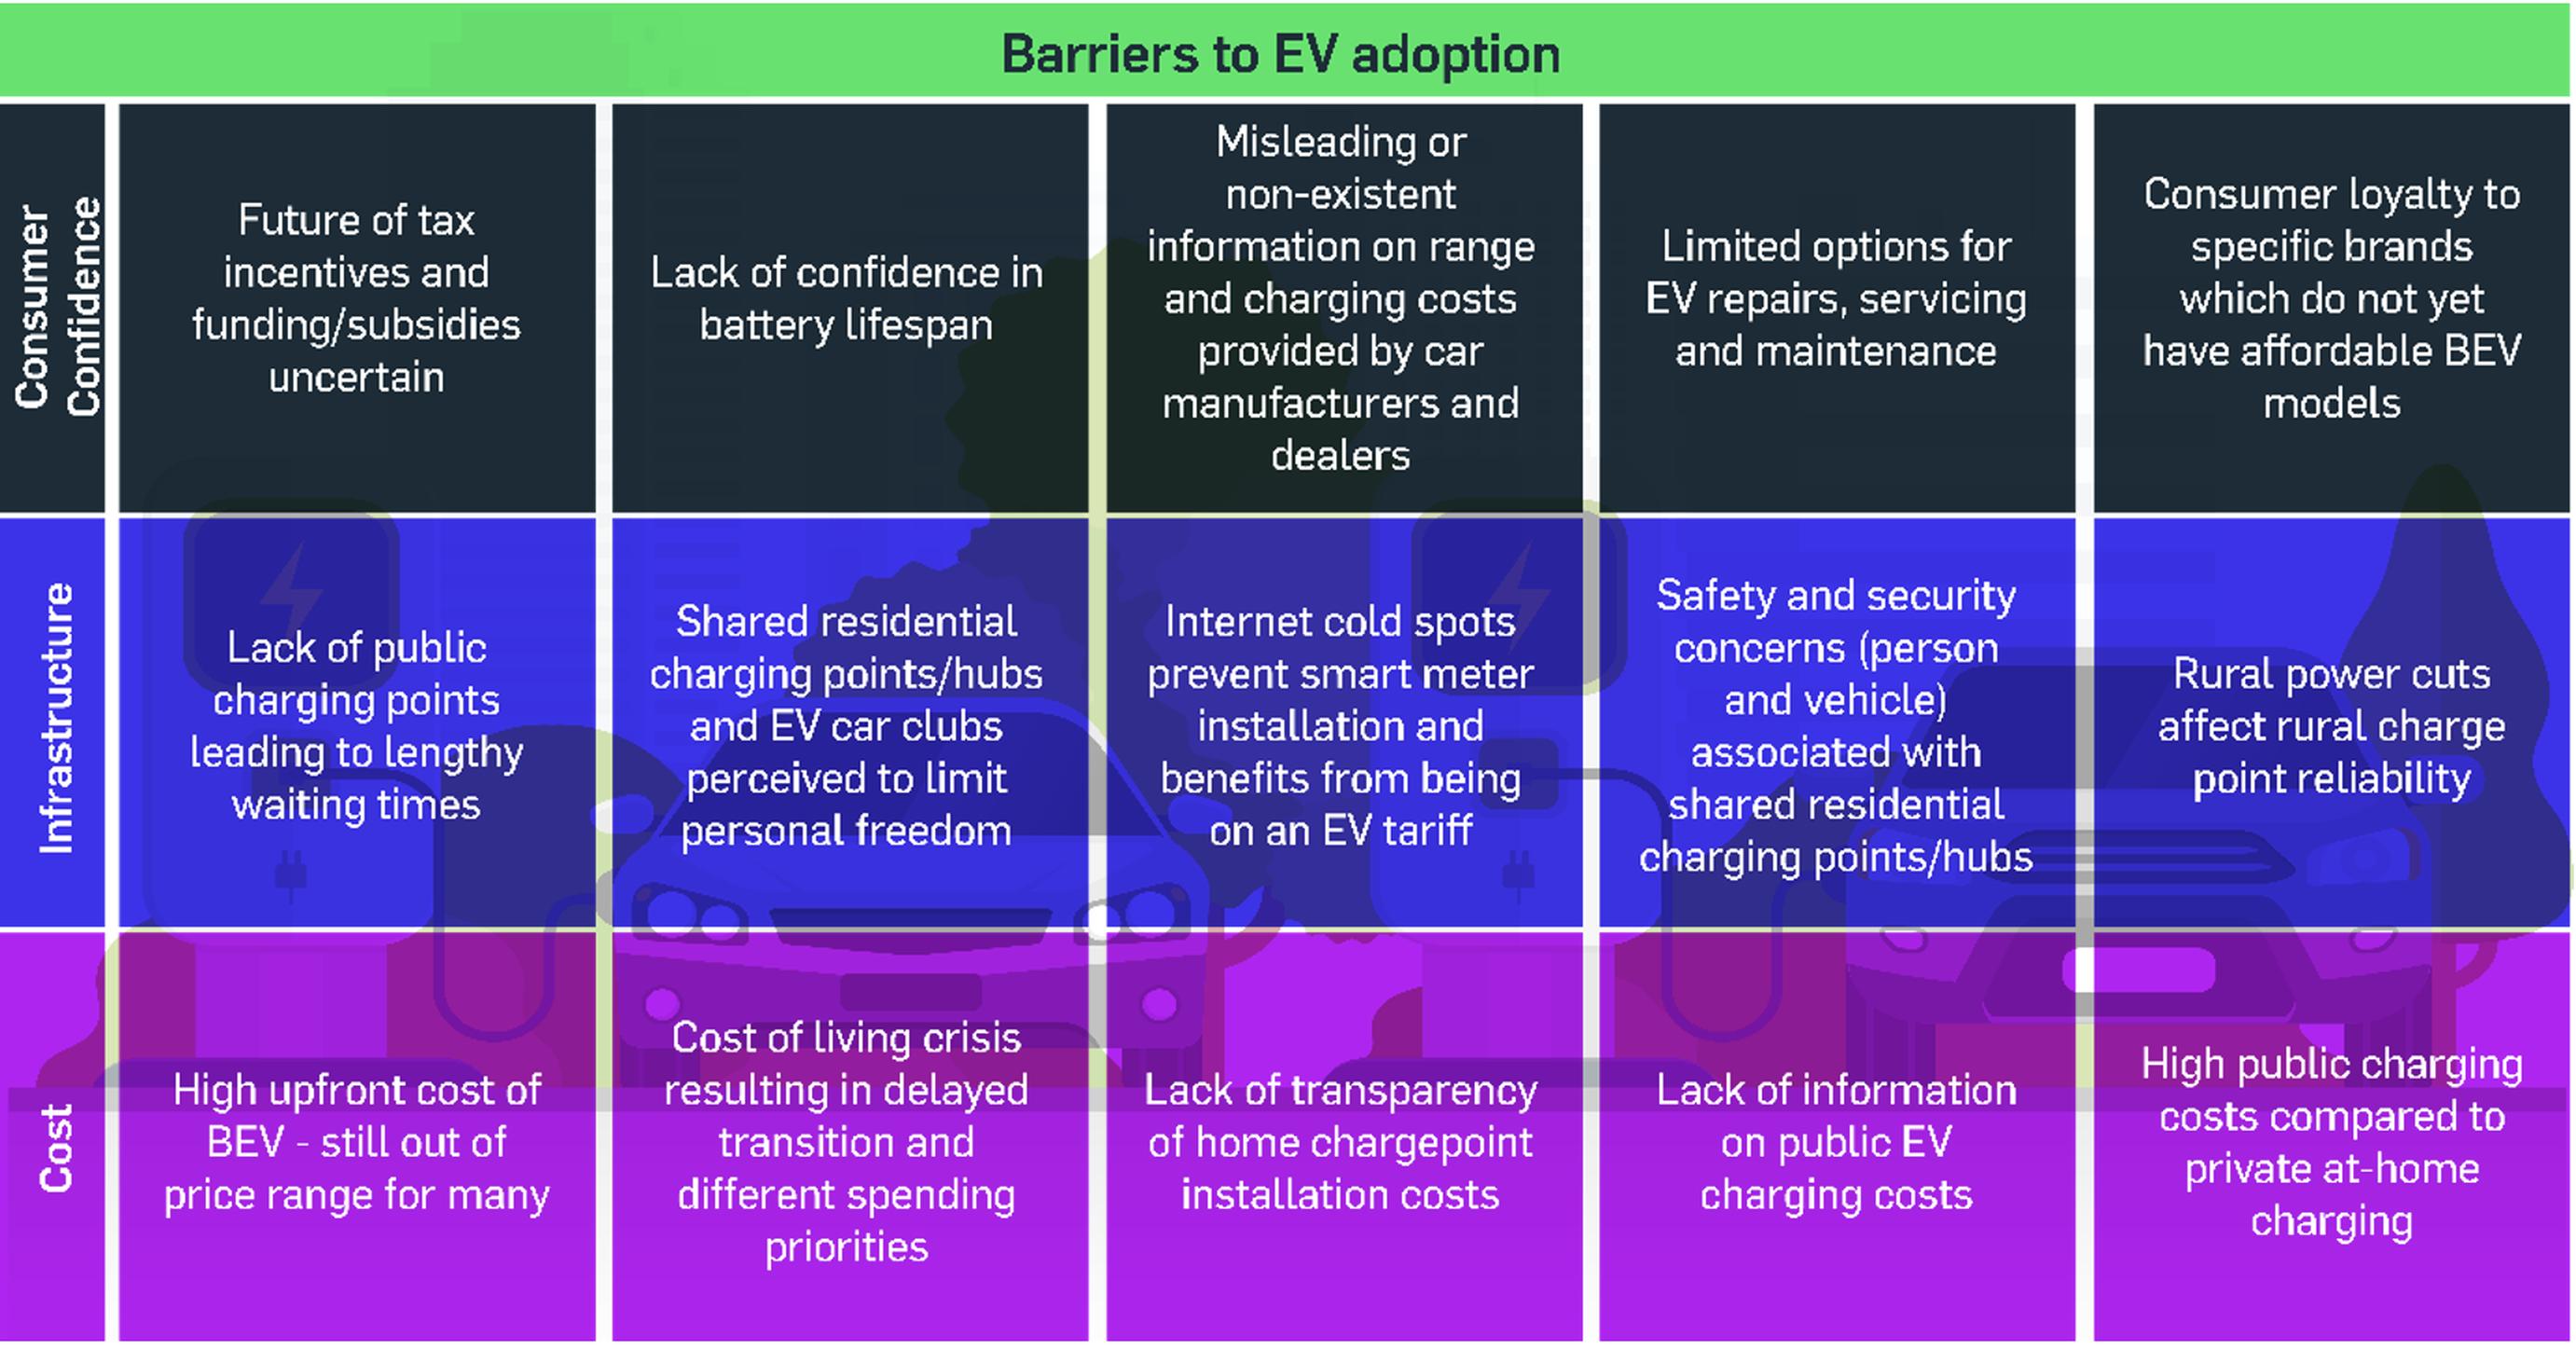 Breaking barriers to enable electric vehicle transition